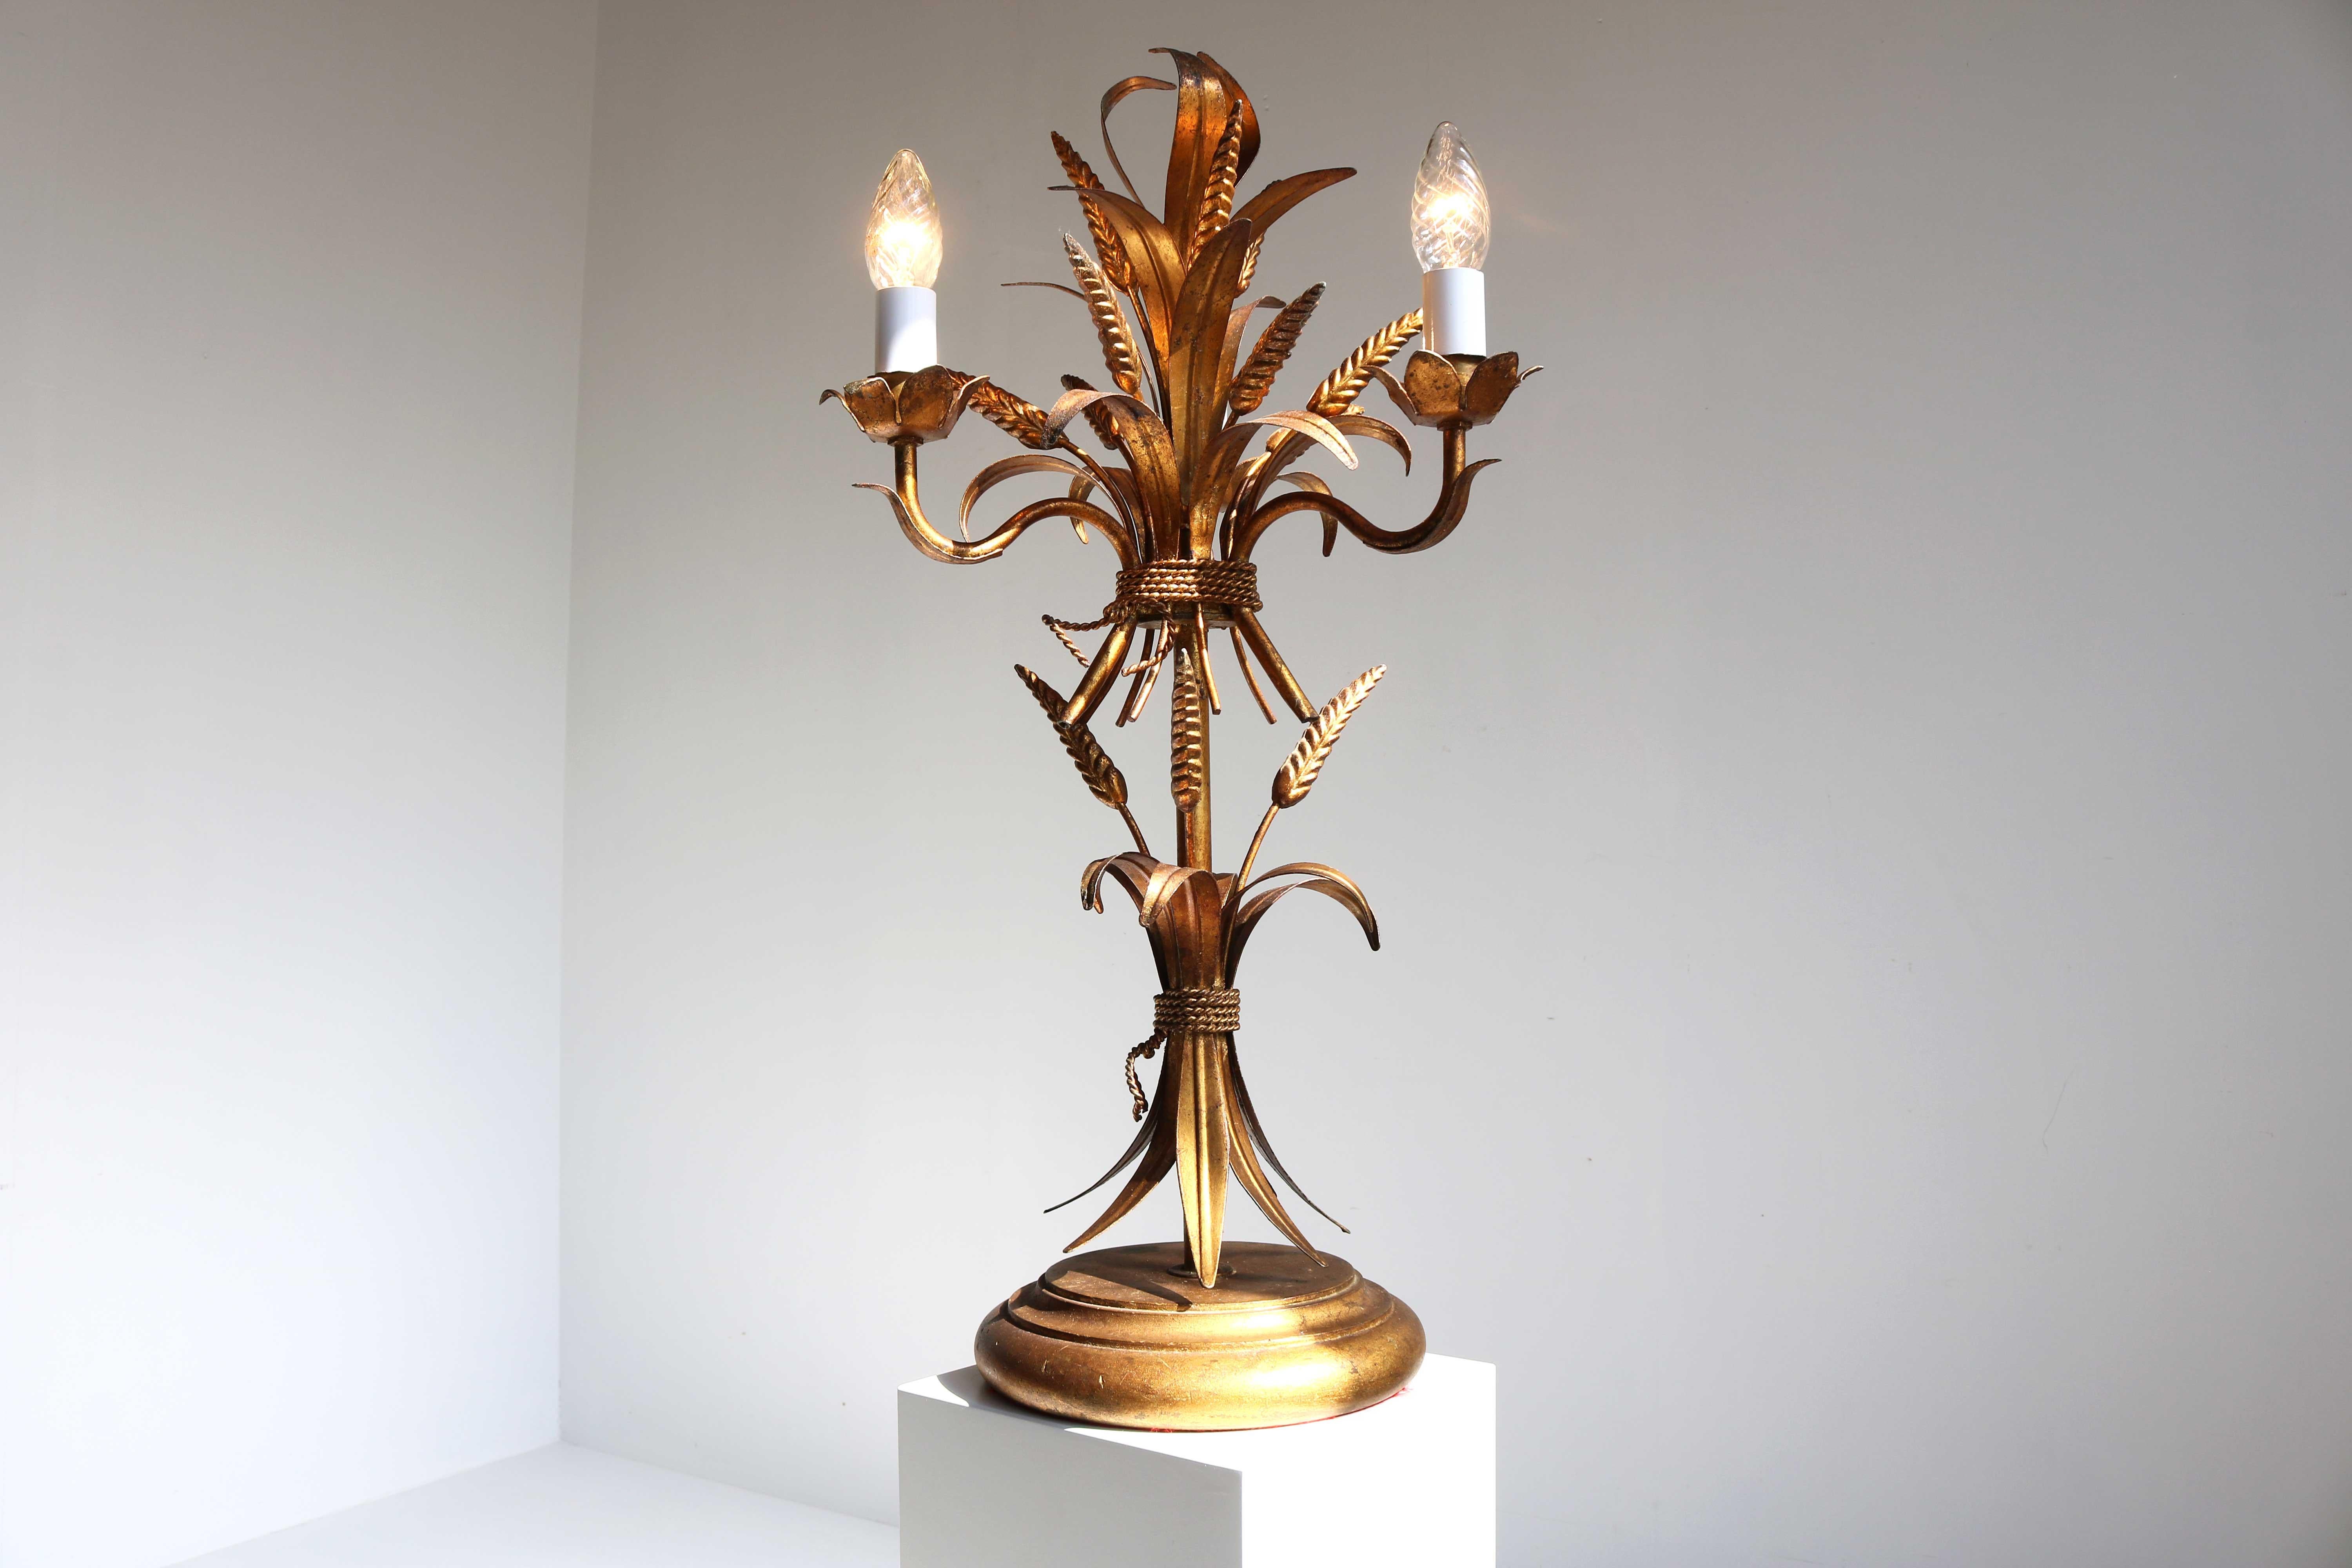 Hans Kögl wheat sheaf table lamp, circa 1960s statement wheat sheaf and gilt leaf lamp by Hans Kögl
Beautiful Hollywood Regency Italian florentine gilt metal table lamp with the imagery of ‘sheaf of wheat’. 
In great and fully working condition.